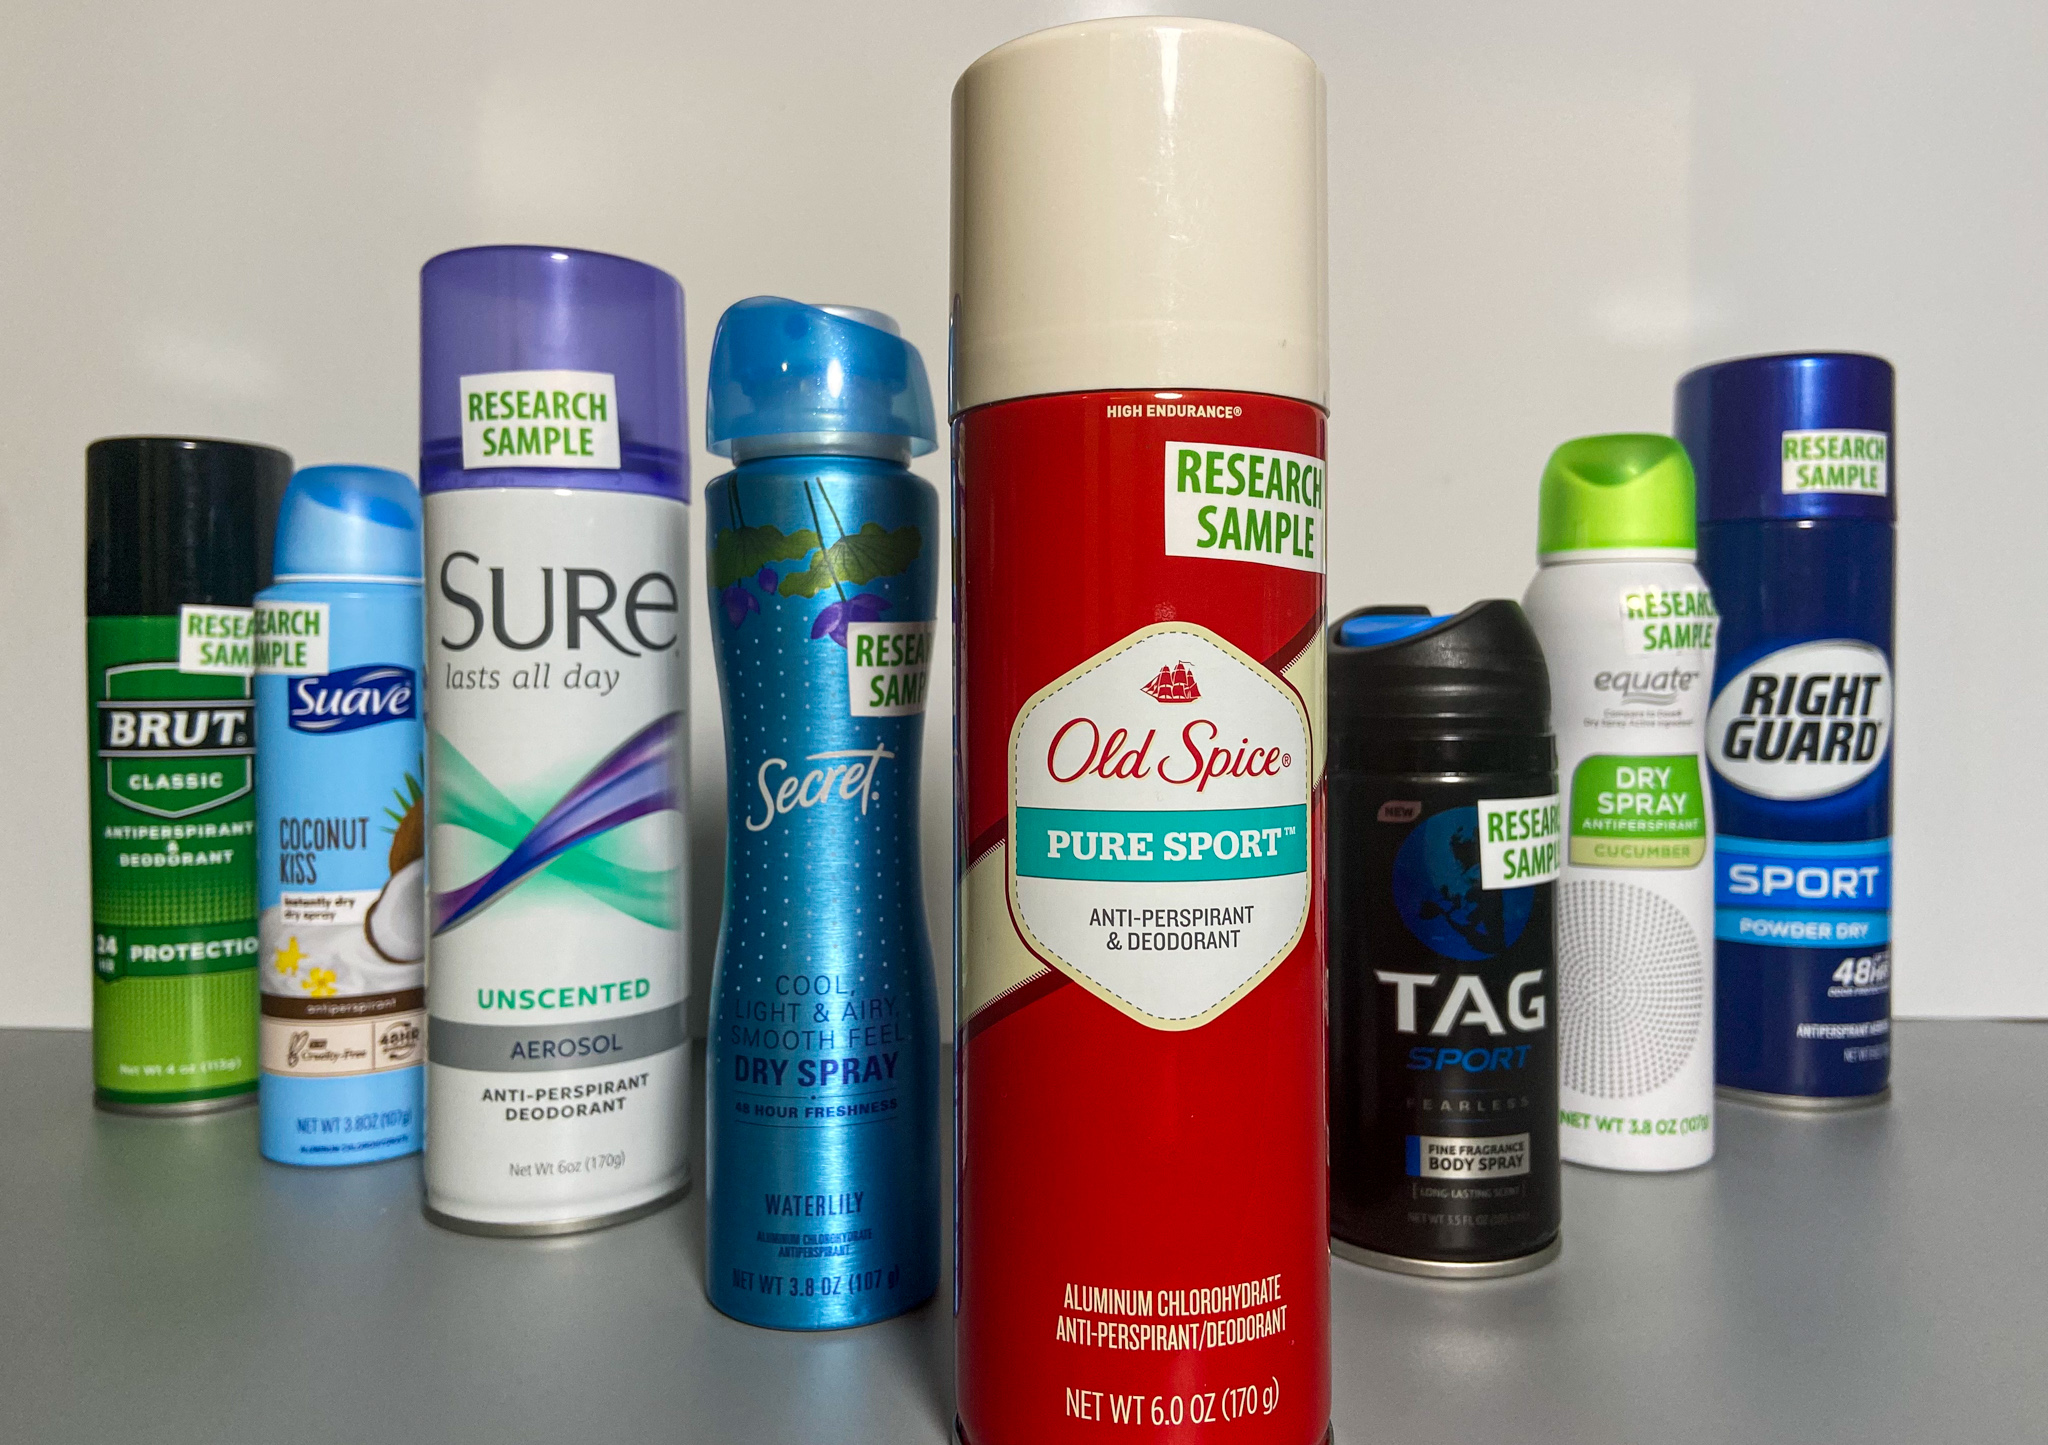 uddannelse Andragende overskud Does Deodorant Cause Cancer? Leukemia-Causing Benzene Found in Some Sprays  - Bloomberg